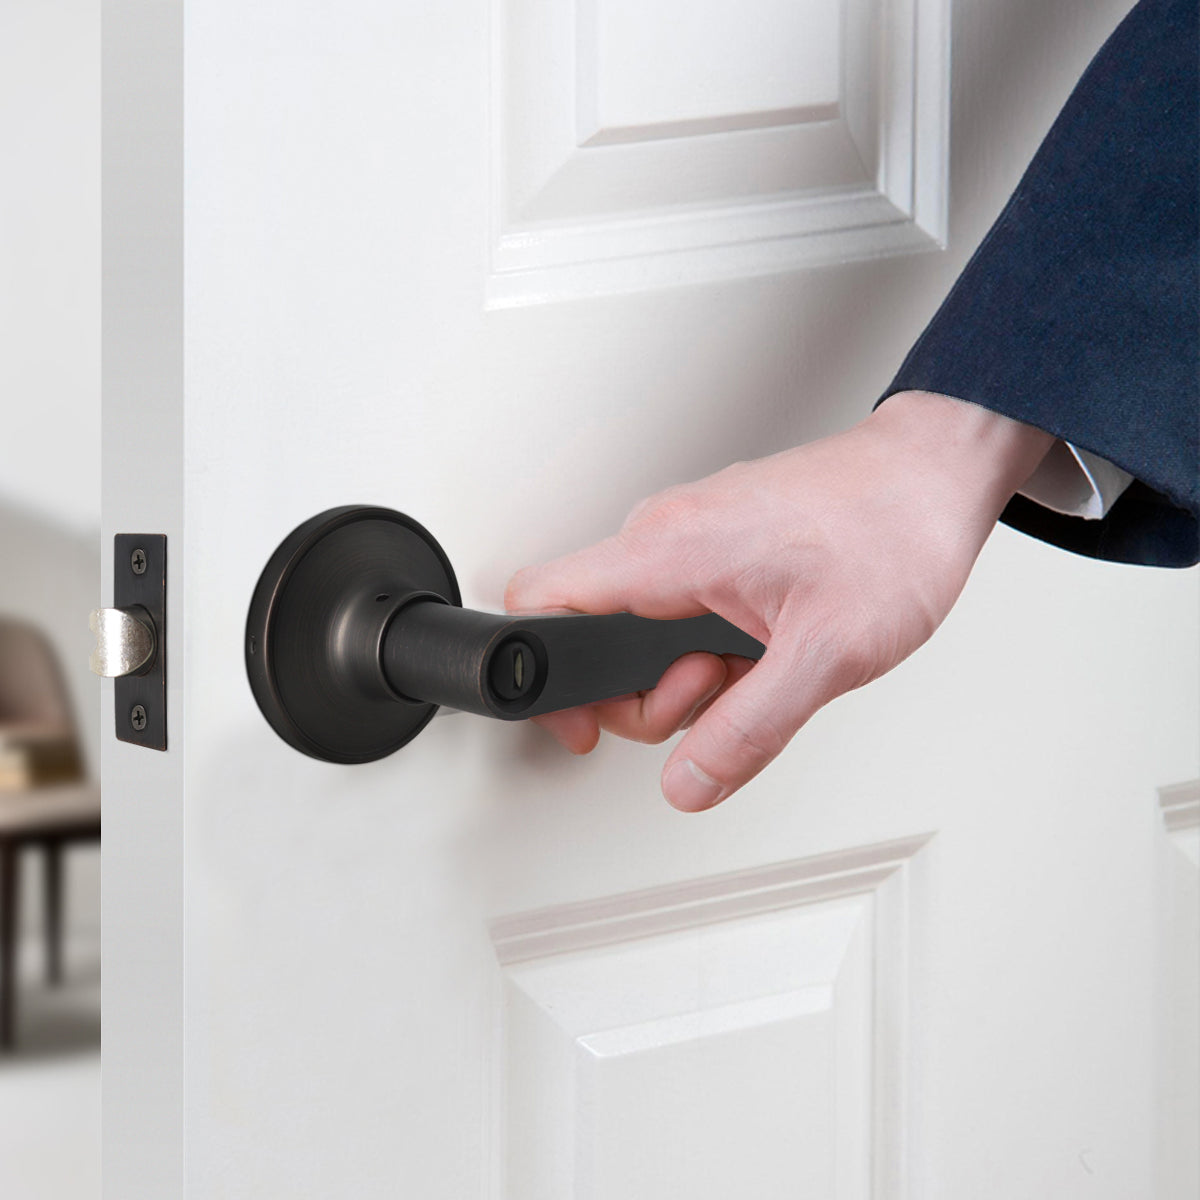 Scroll Wave Style Door Handles Oil Rubbed Bronze Finish Privacy/Passage Function Door Lever Lock - DL850AORB